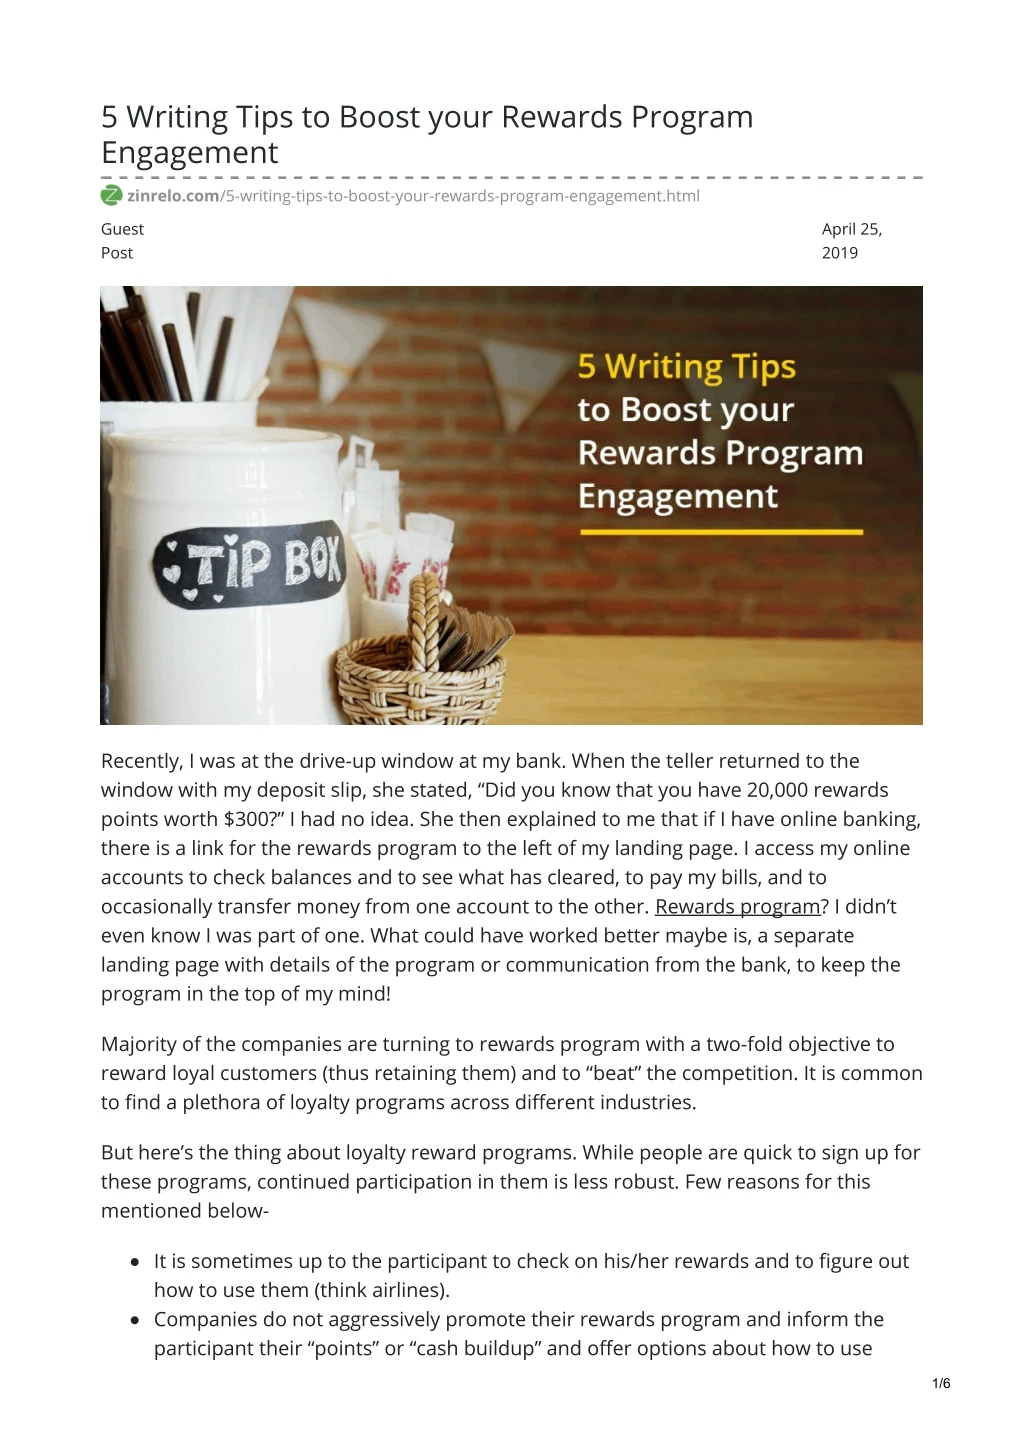 5 writing tips to boost your rewards program